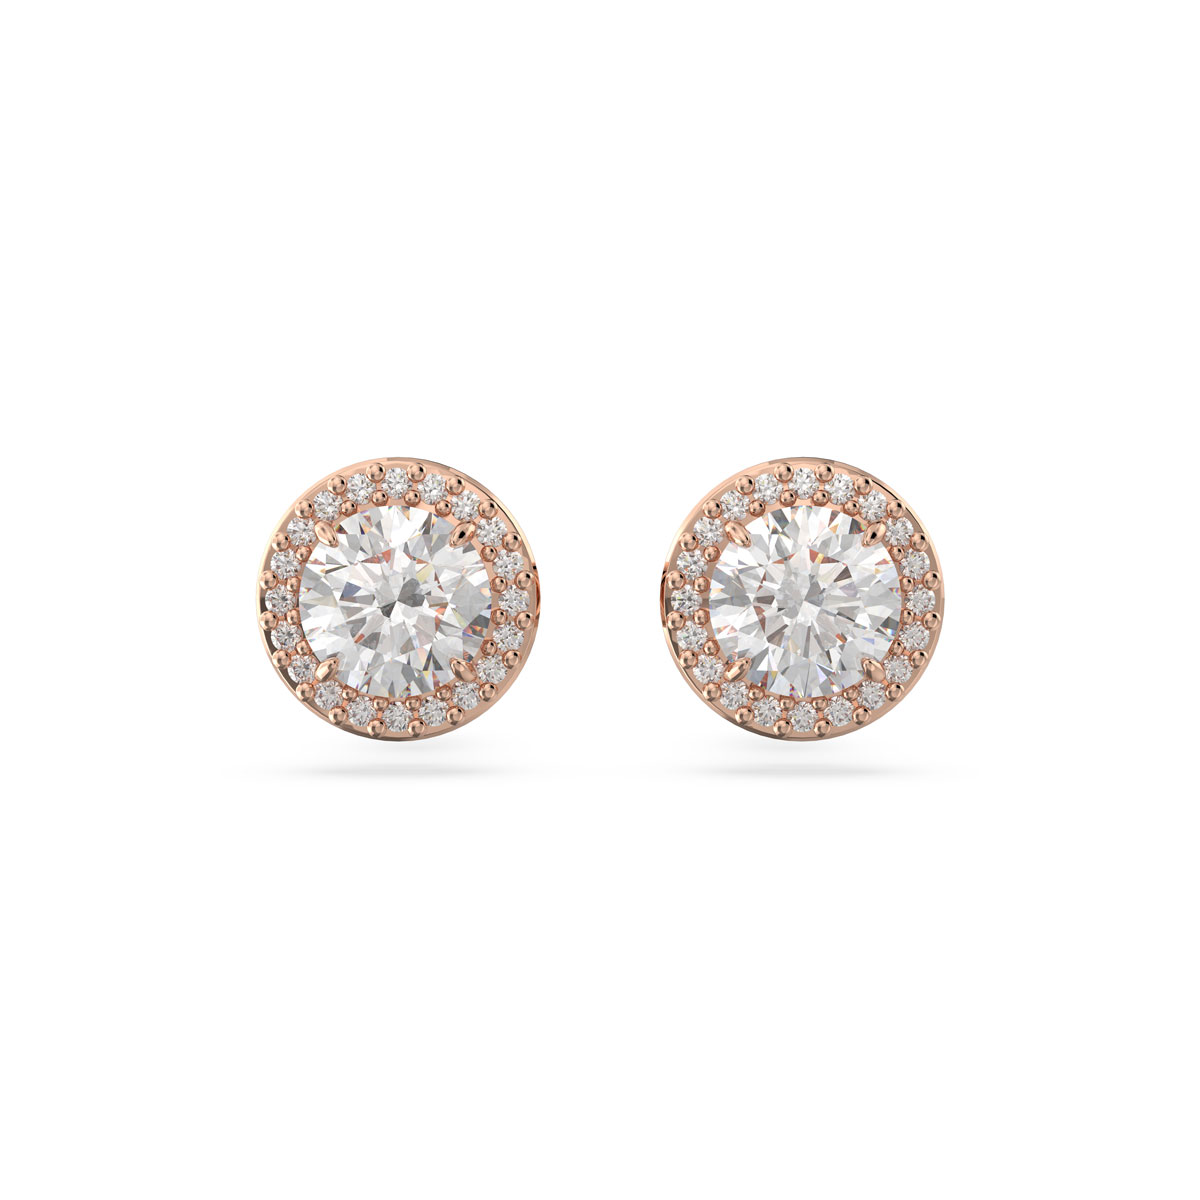 Swarovski Constella Round Cut Pave and Rose Gold Stud Pierced Earrings